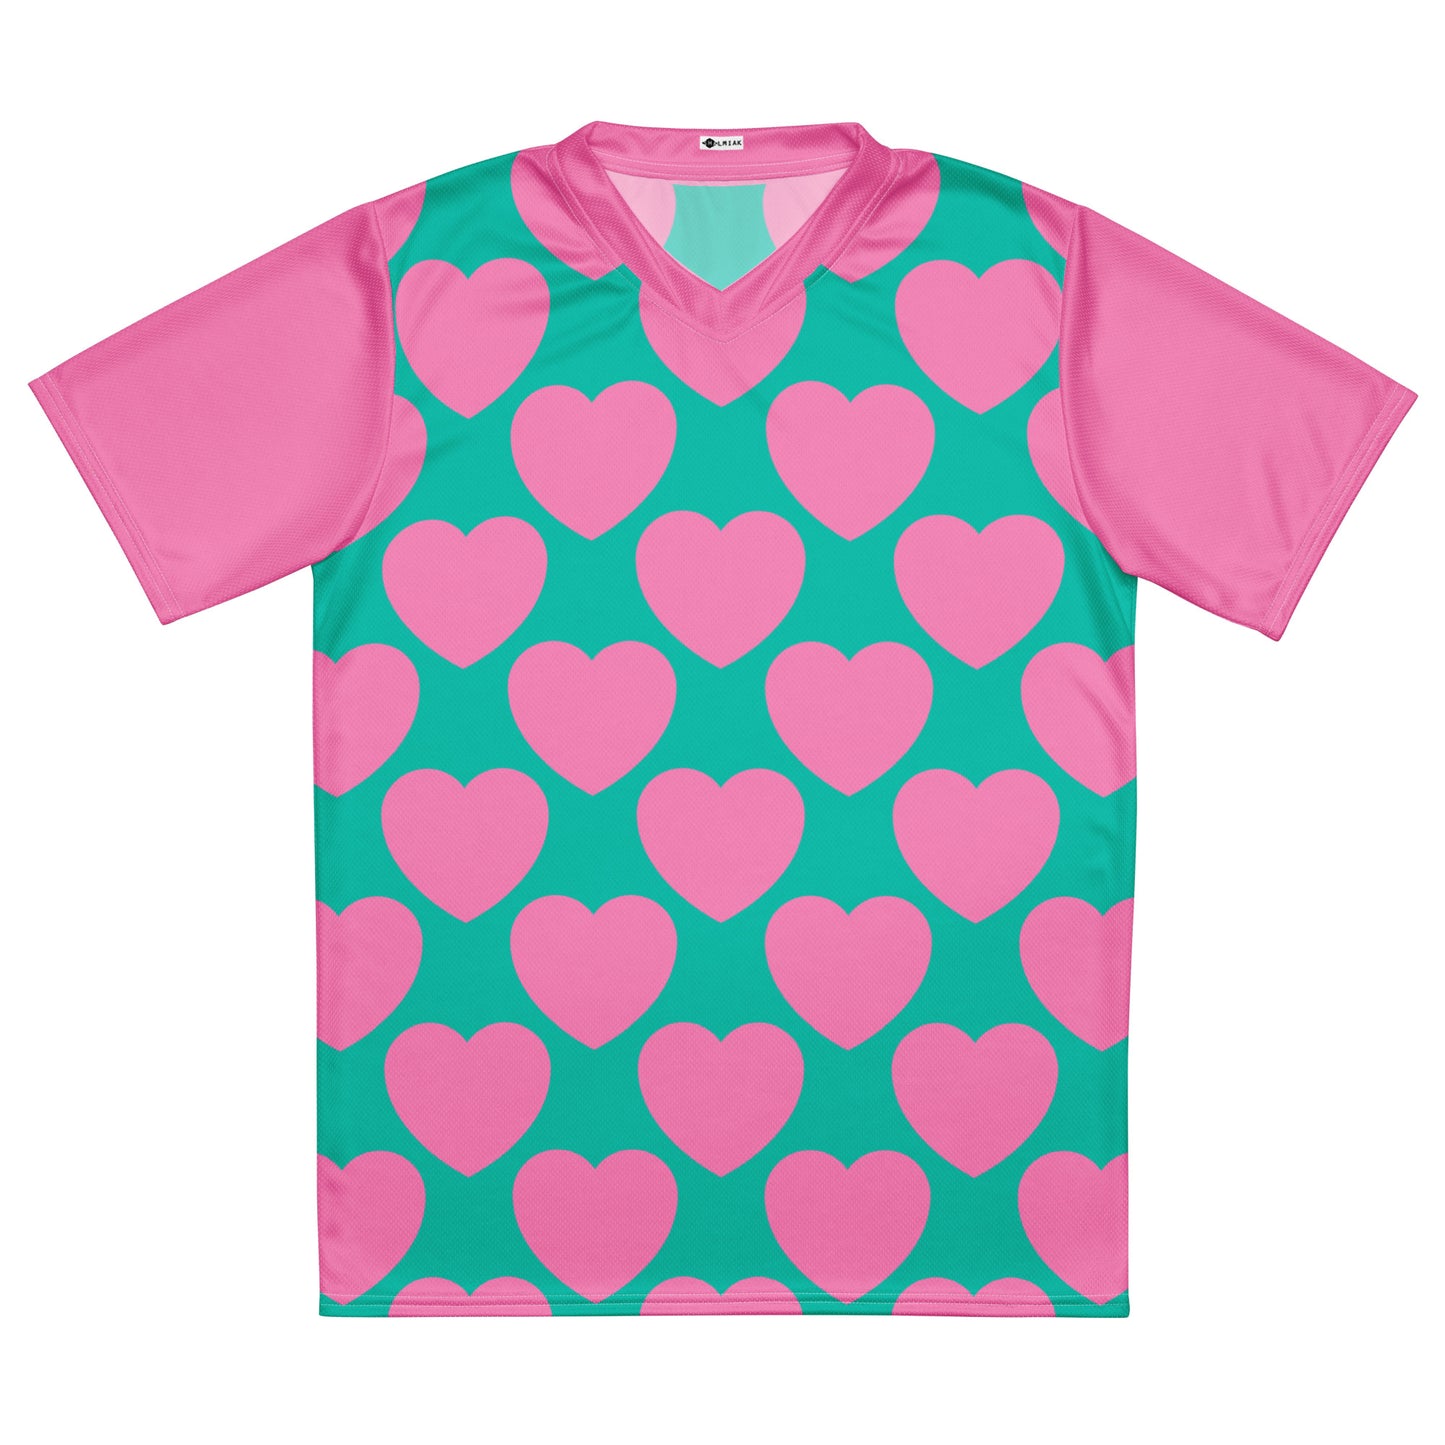 ELLIE LOVE pink mint - Recycled unisex sports jersey